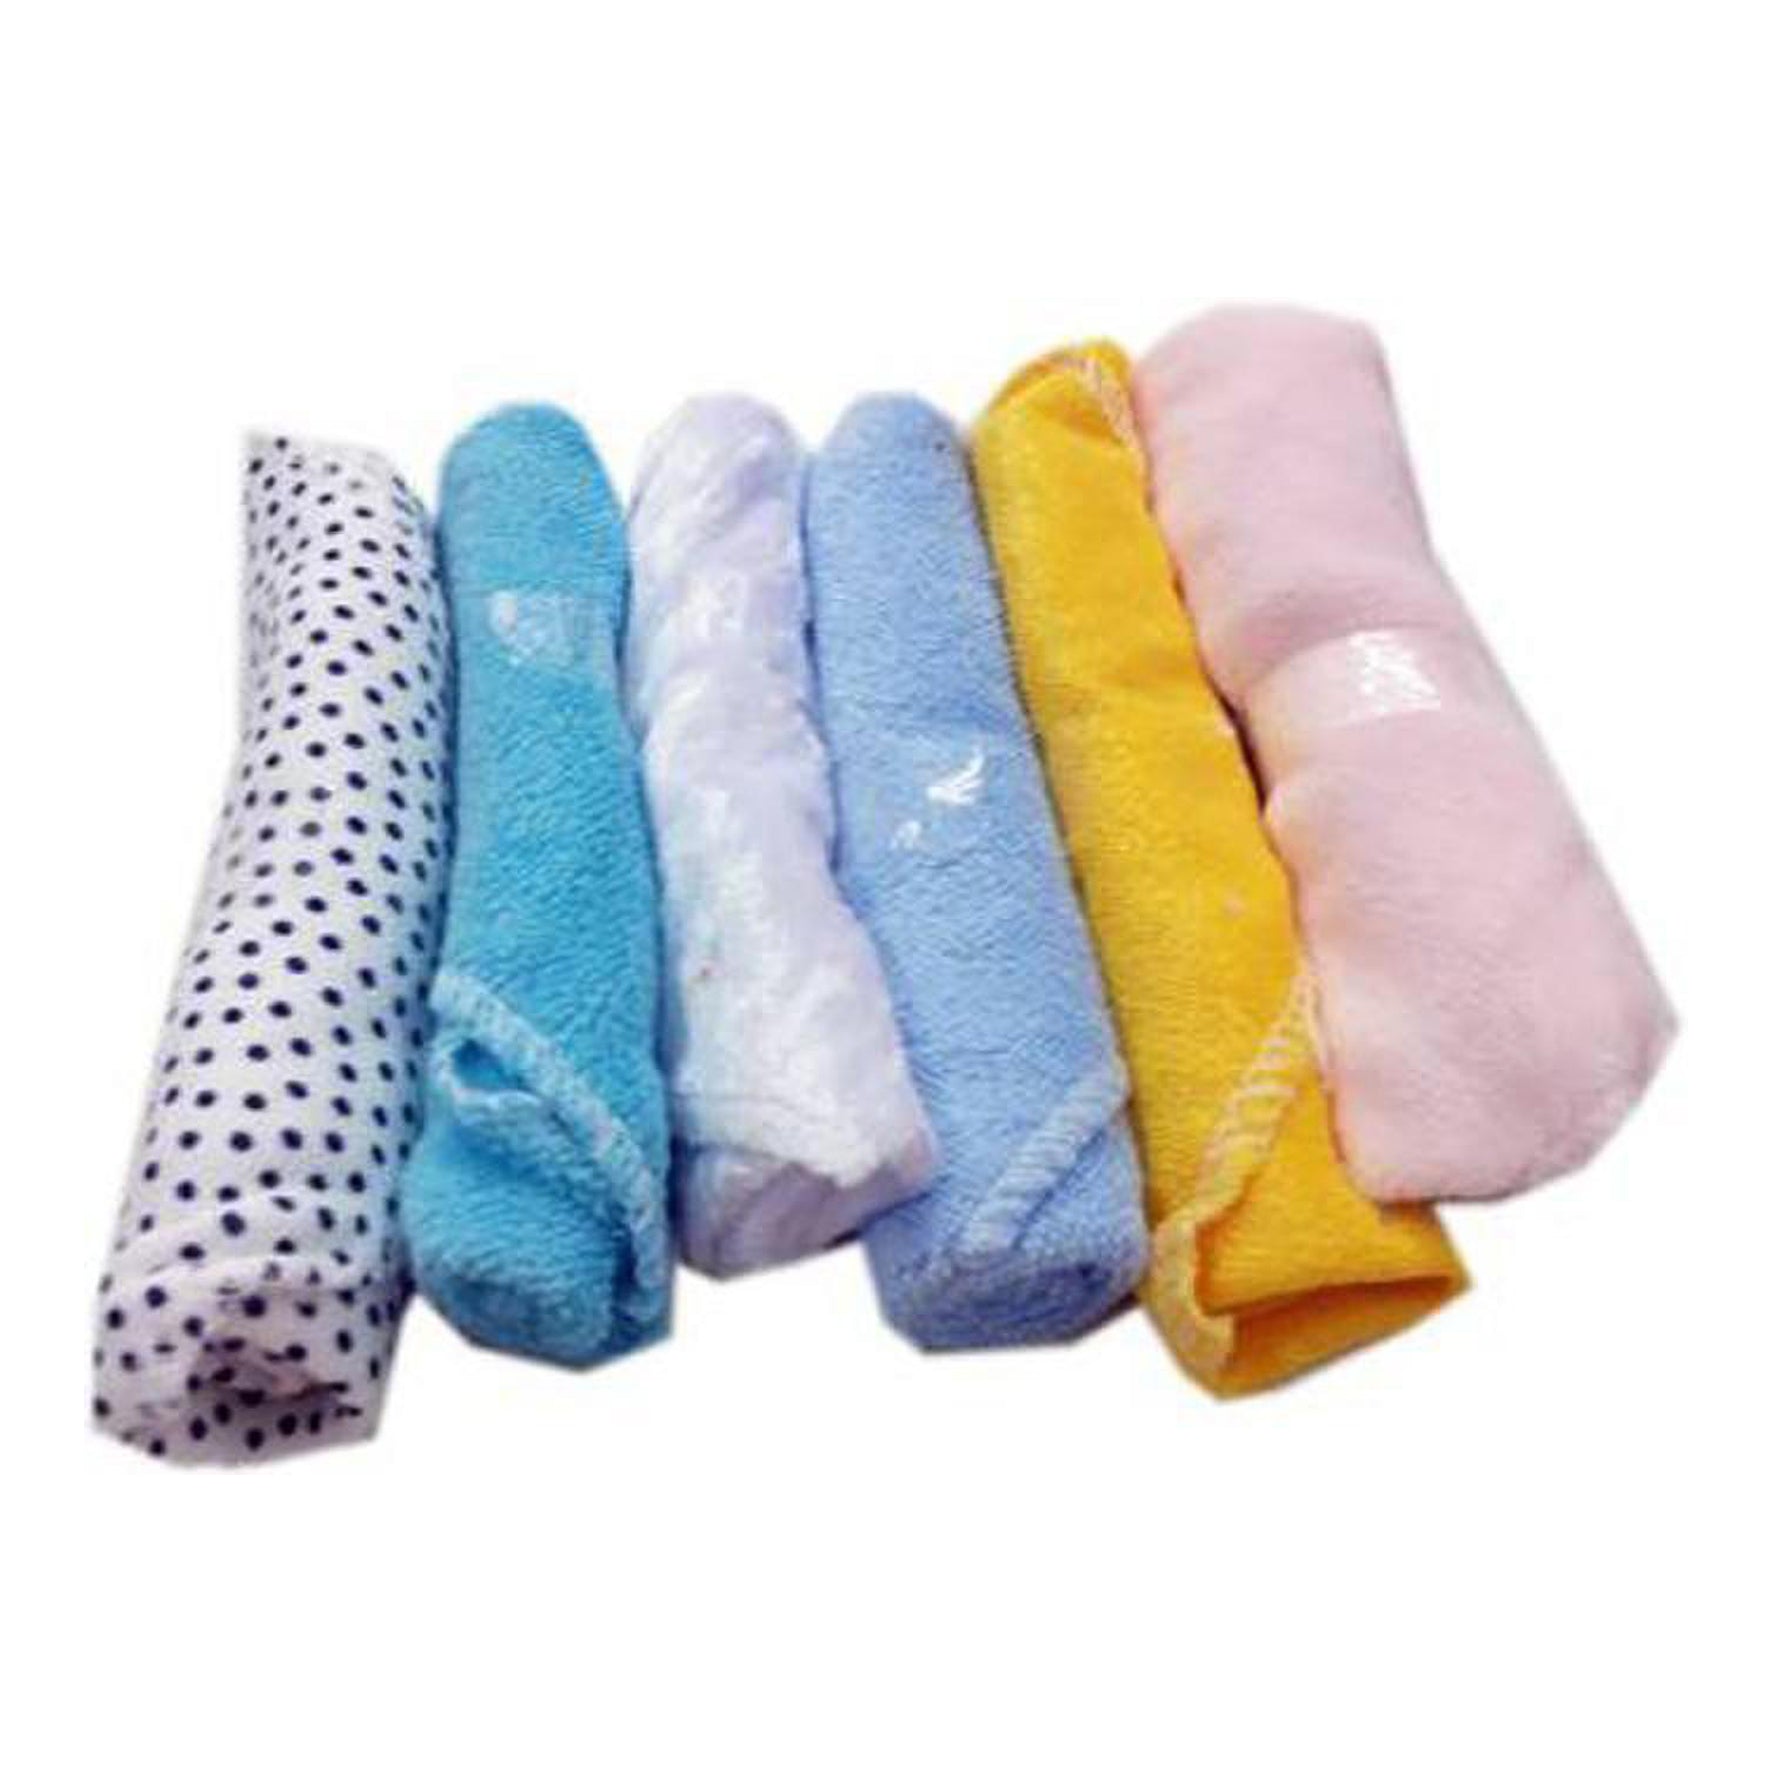 New Born Baby Colored Towel Hankies Pack Of 6 [